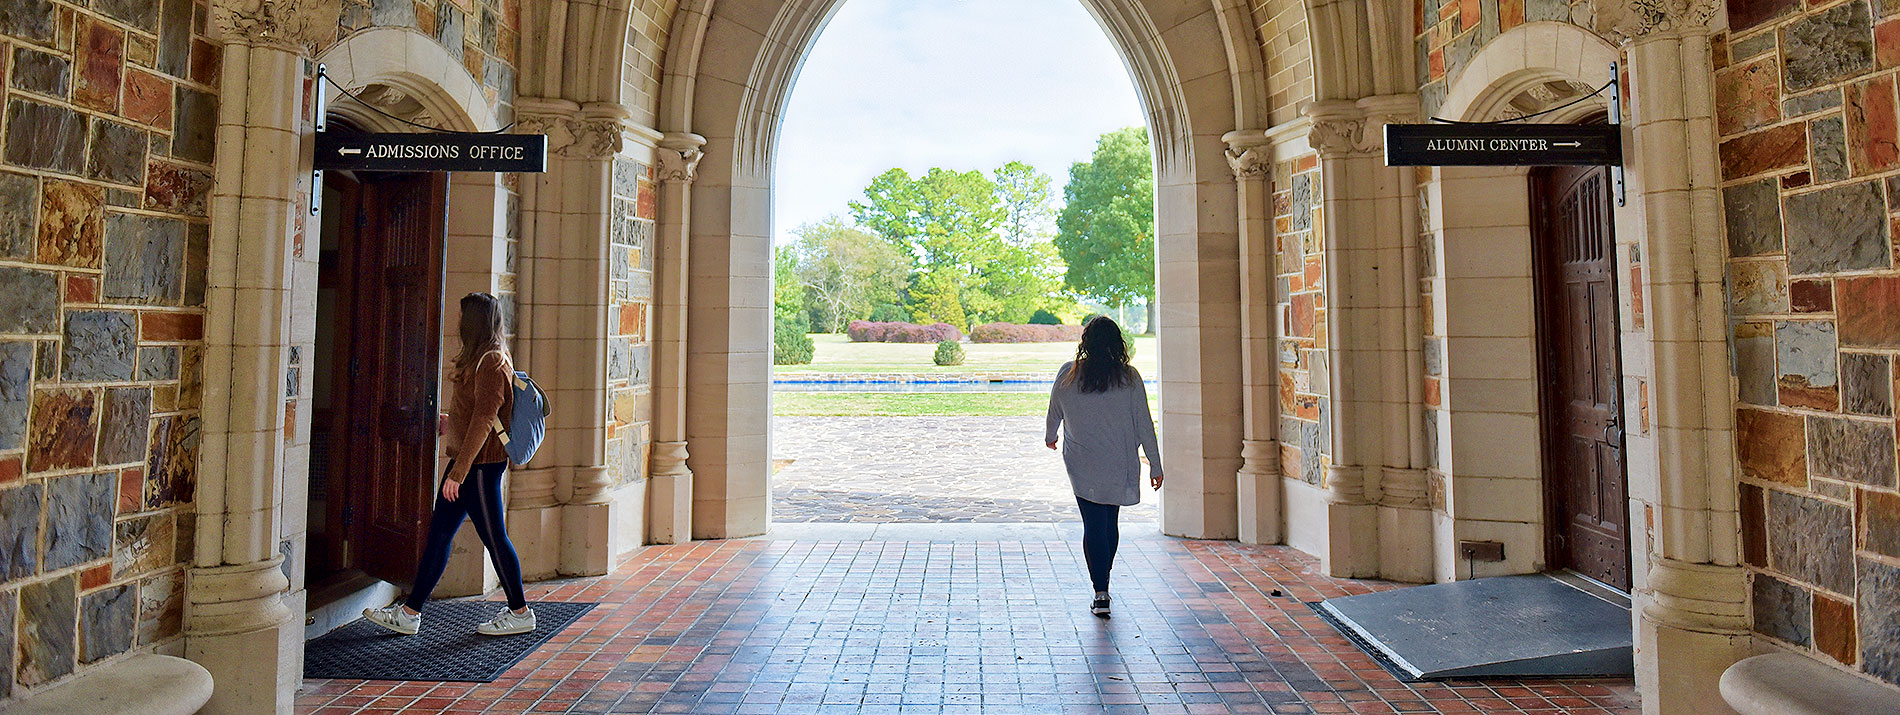 students walking in an archway